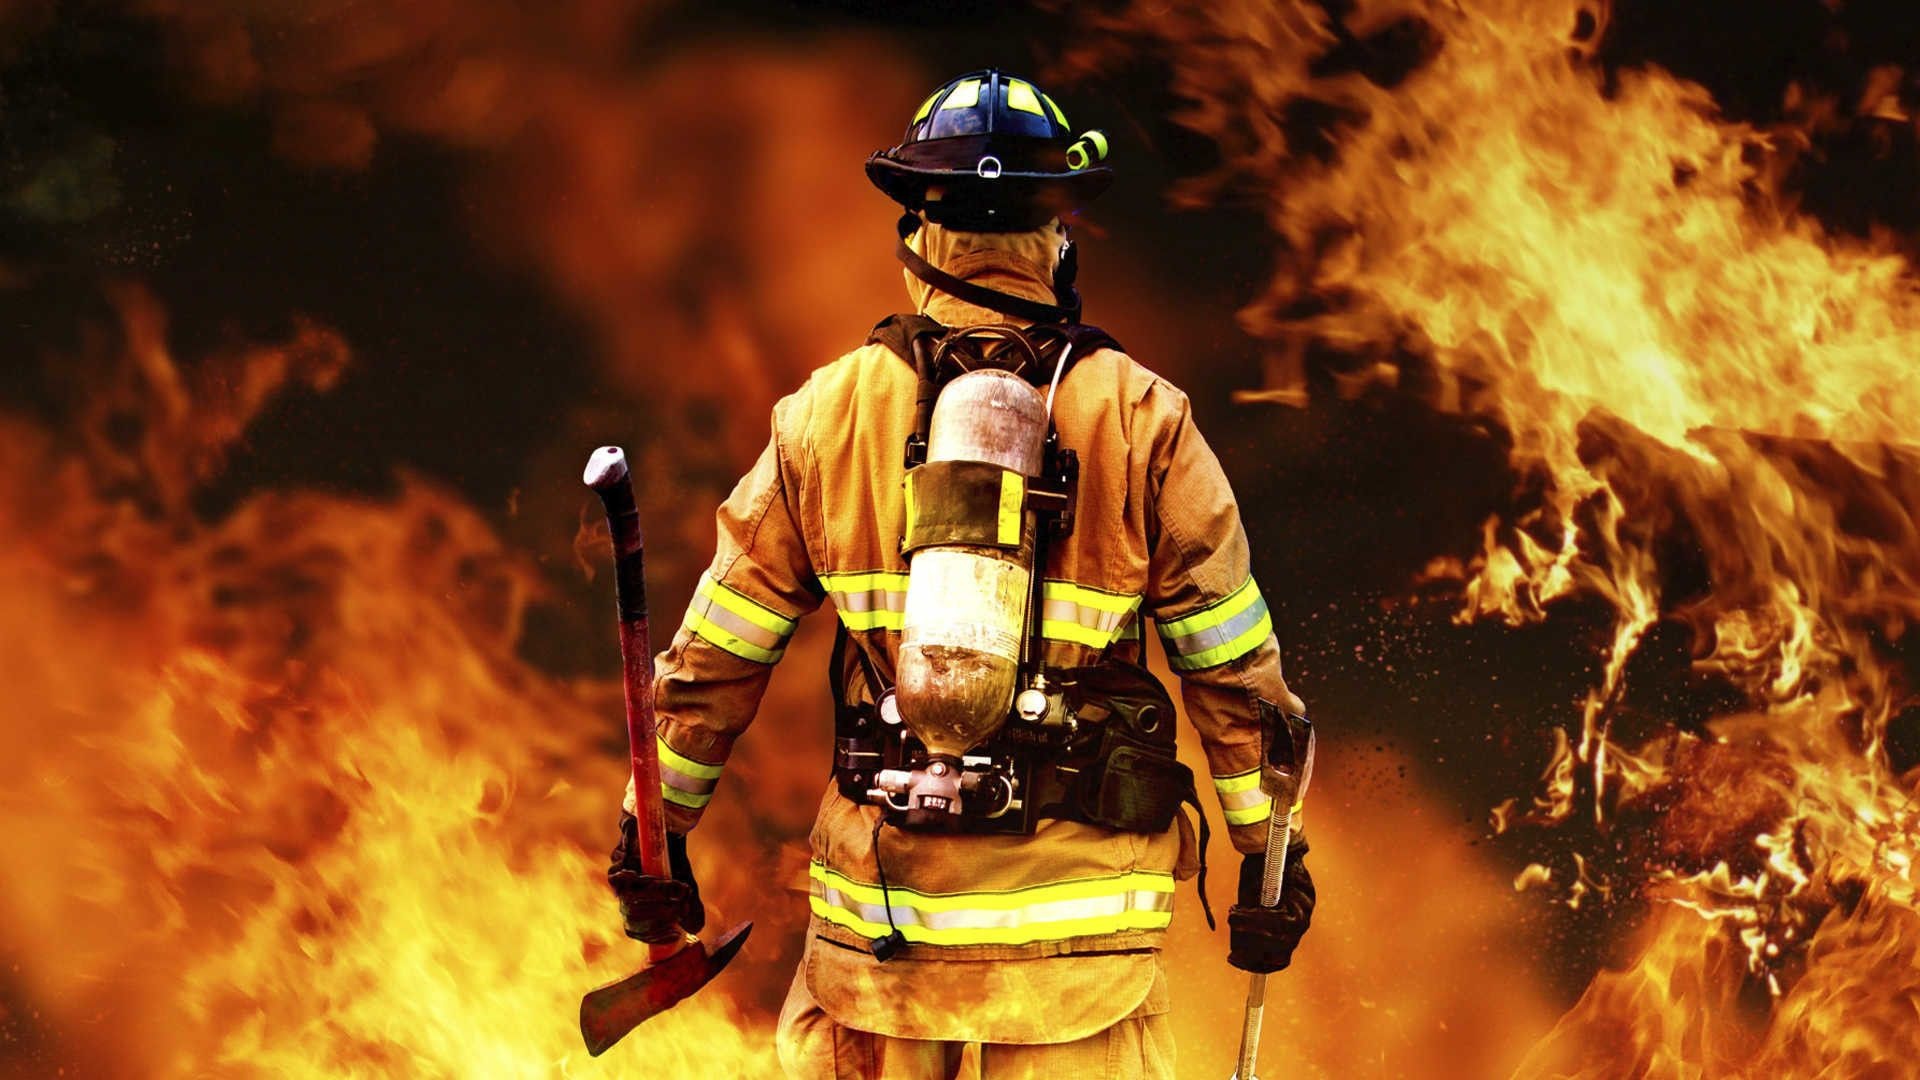 Firefighter, Brave heroes, Fire emergency, Risky situations, 1920x1080 Full HD Desktop